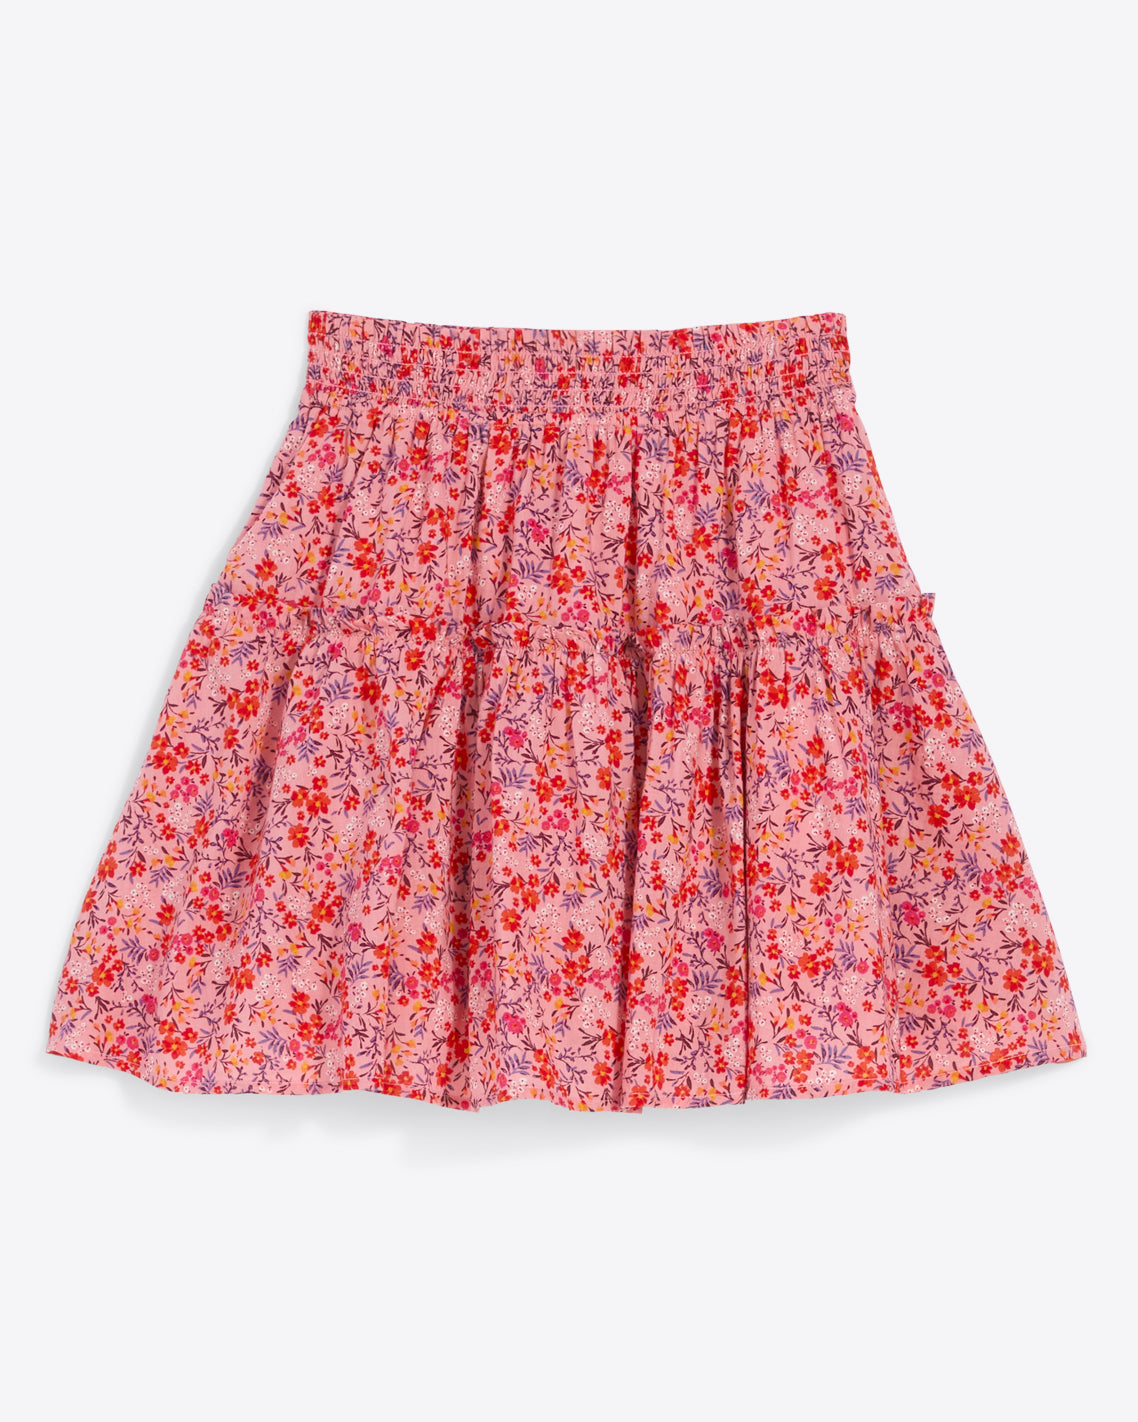 Pull On Mini Skirt in Pansy Floral